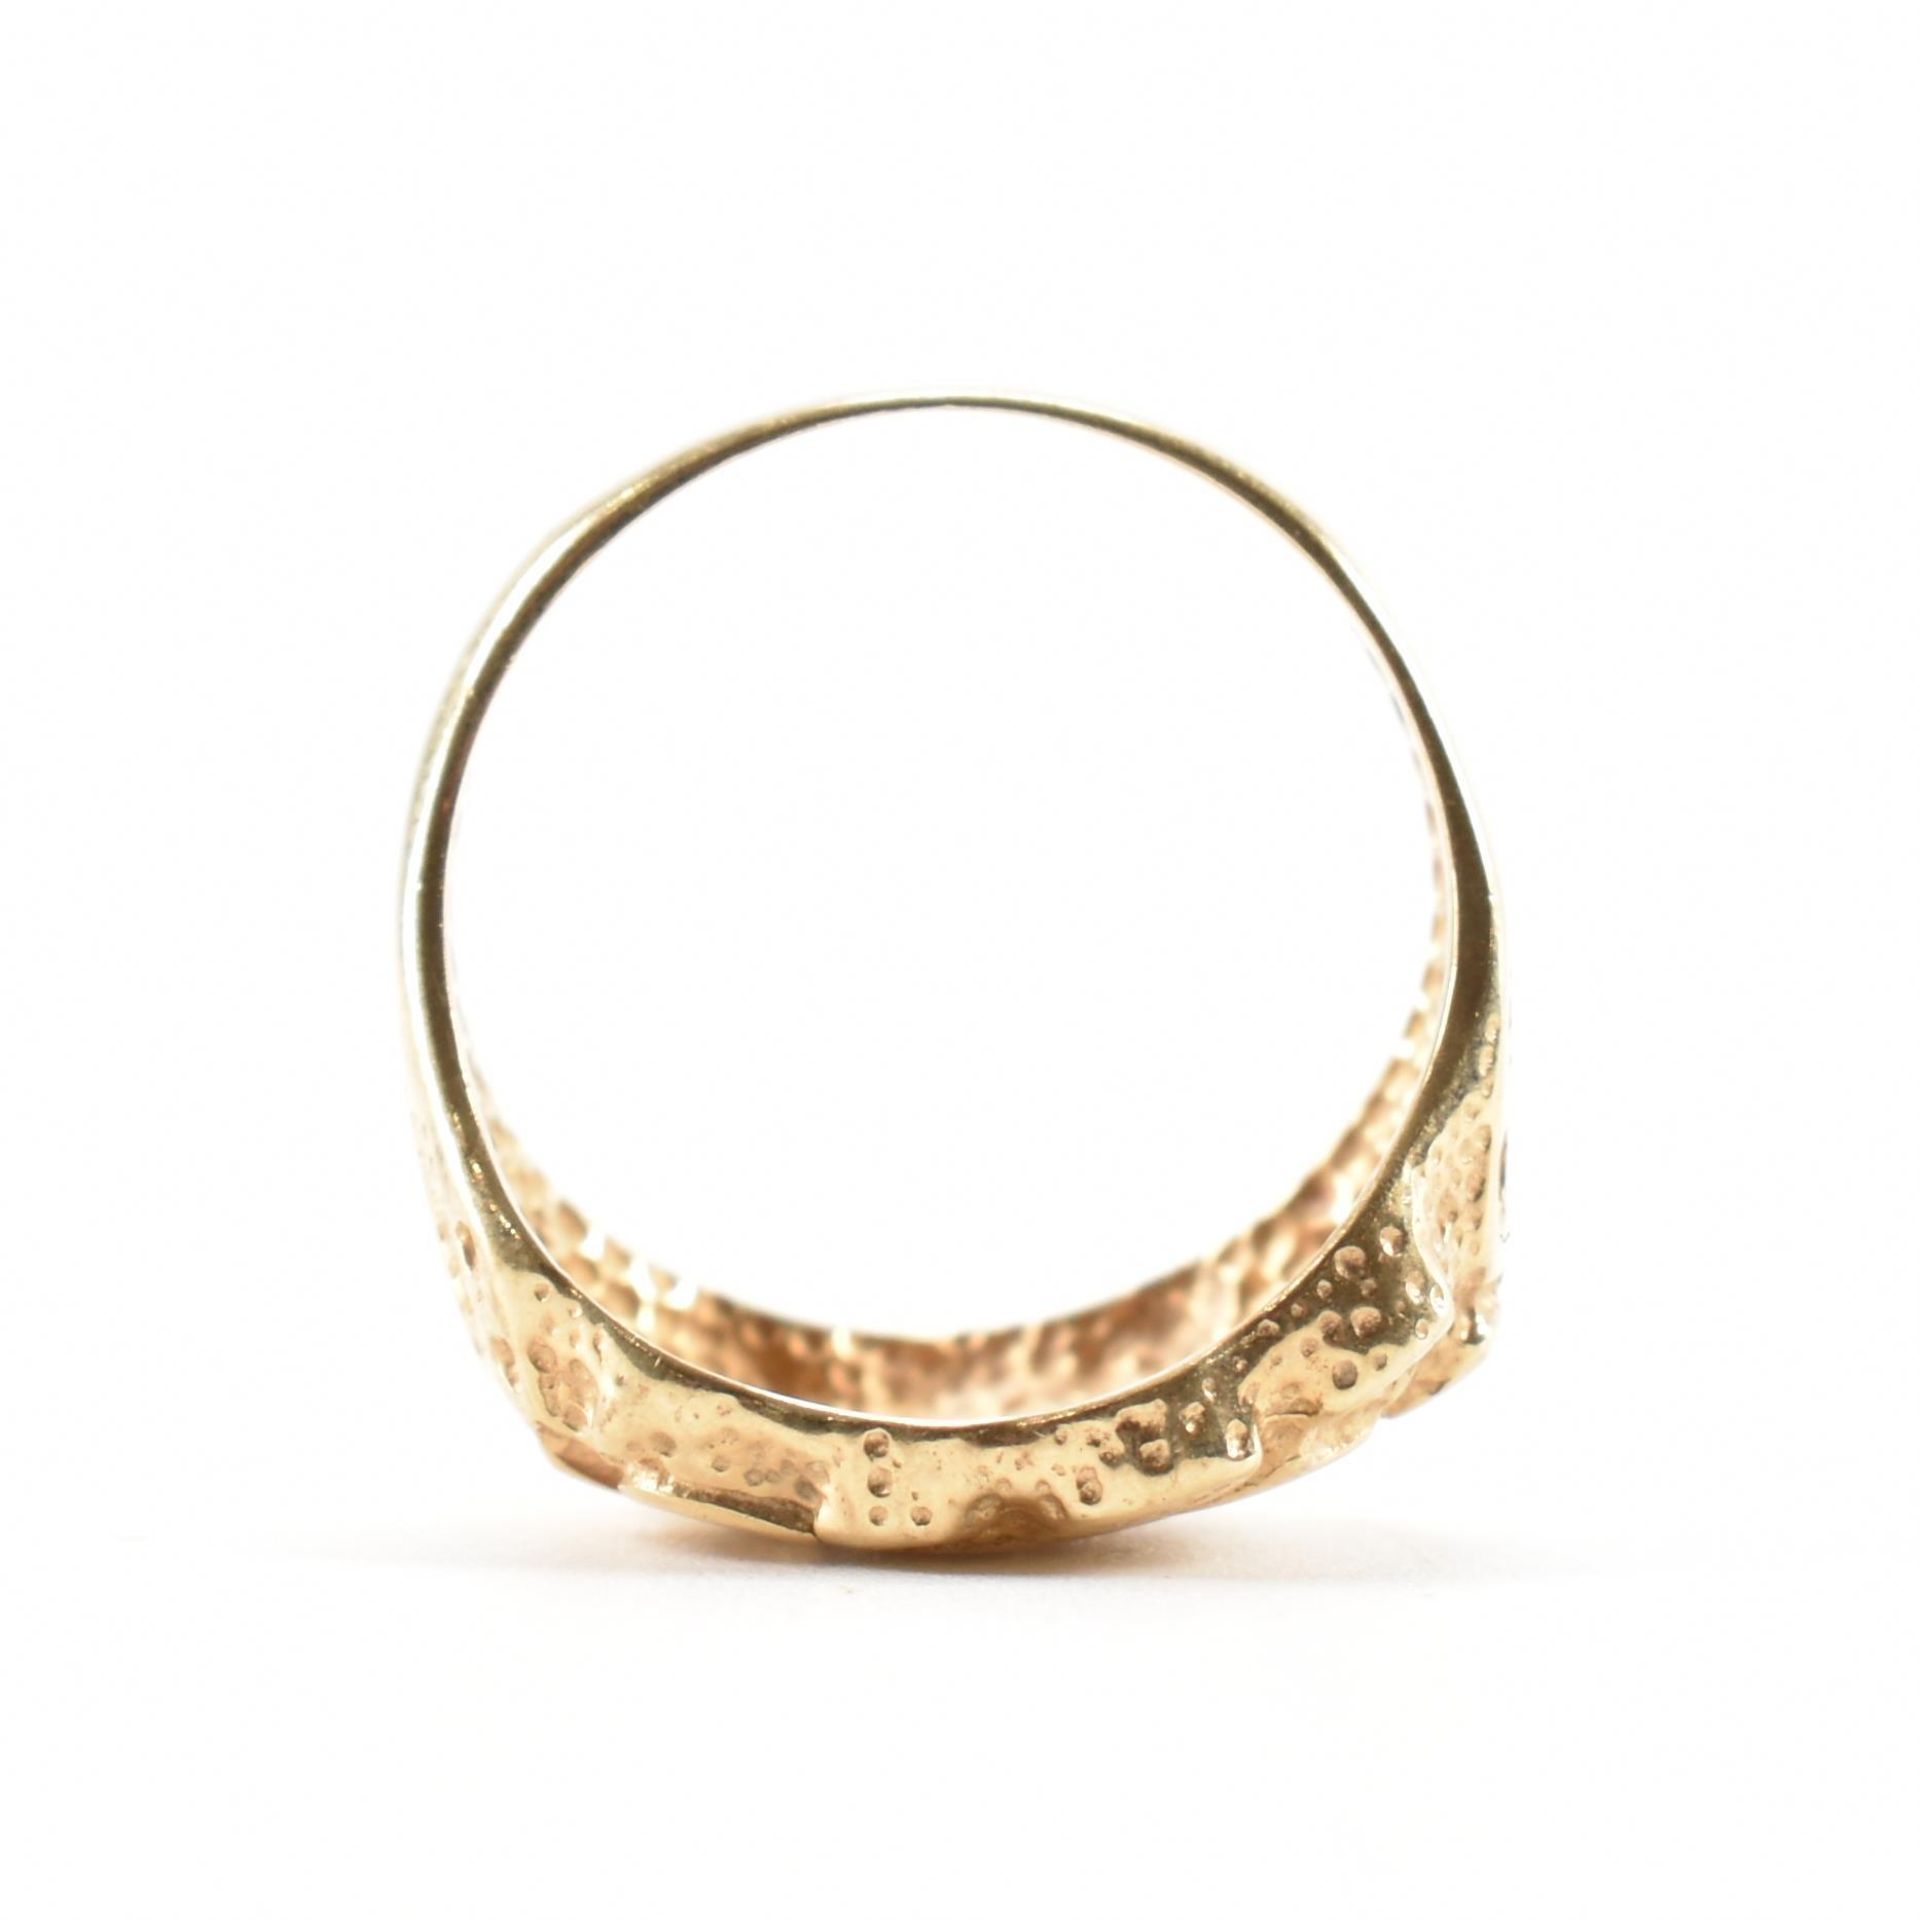 HALLMARKED 9CT GOLD NUGGET RING - Image 6 of 9